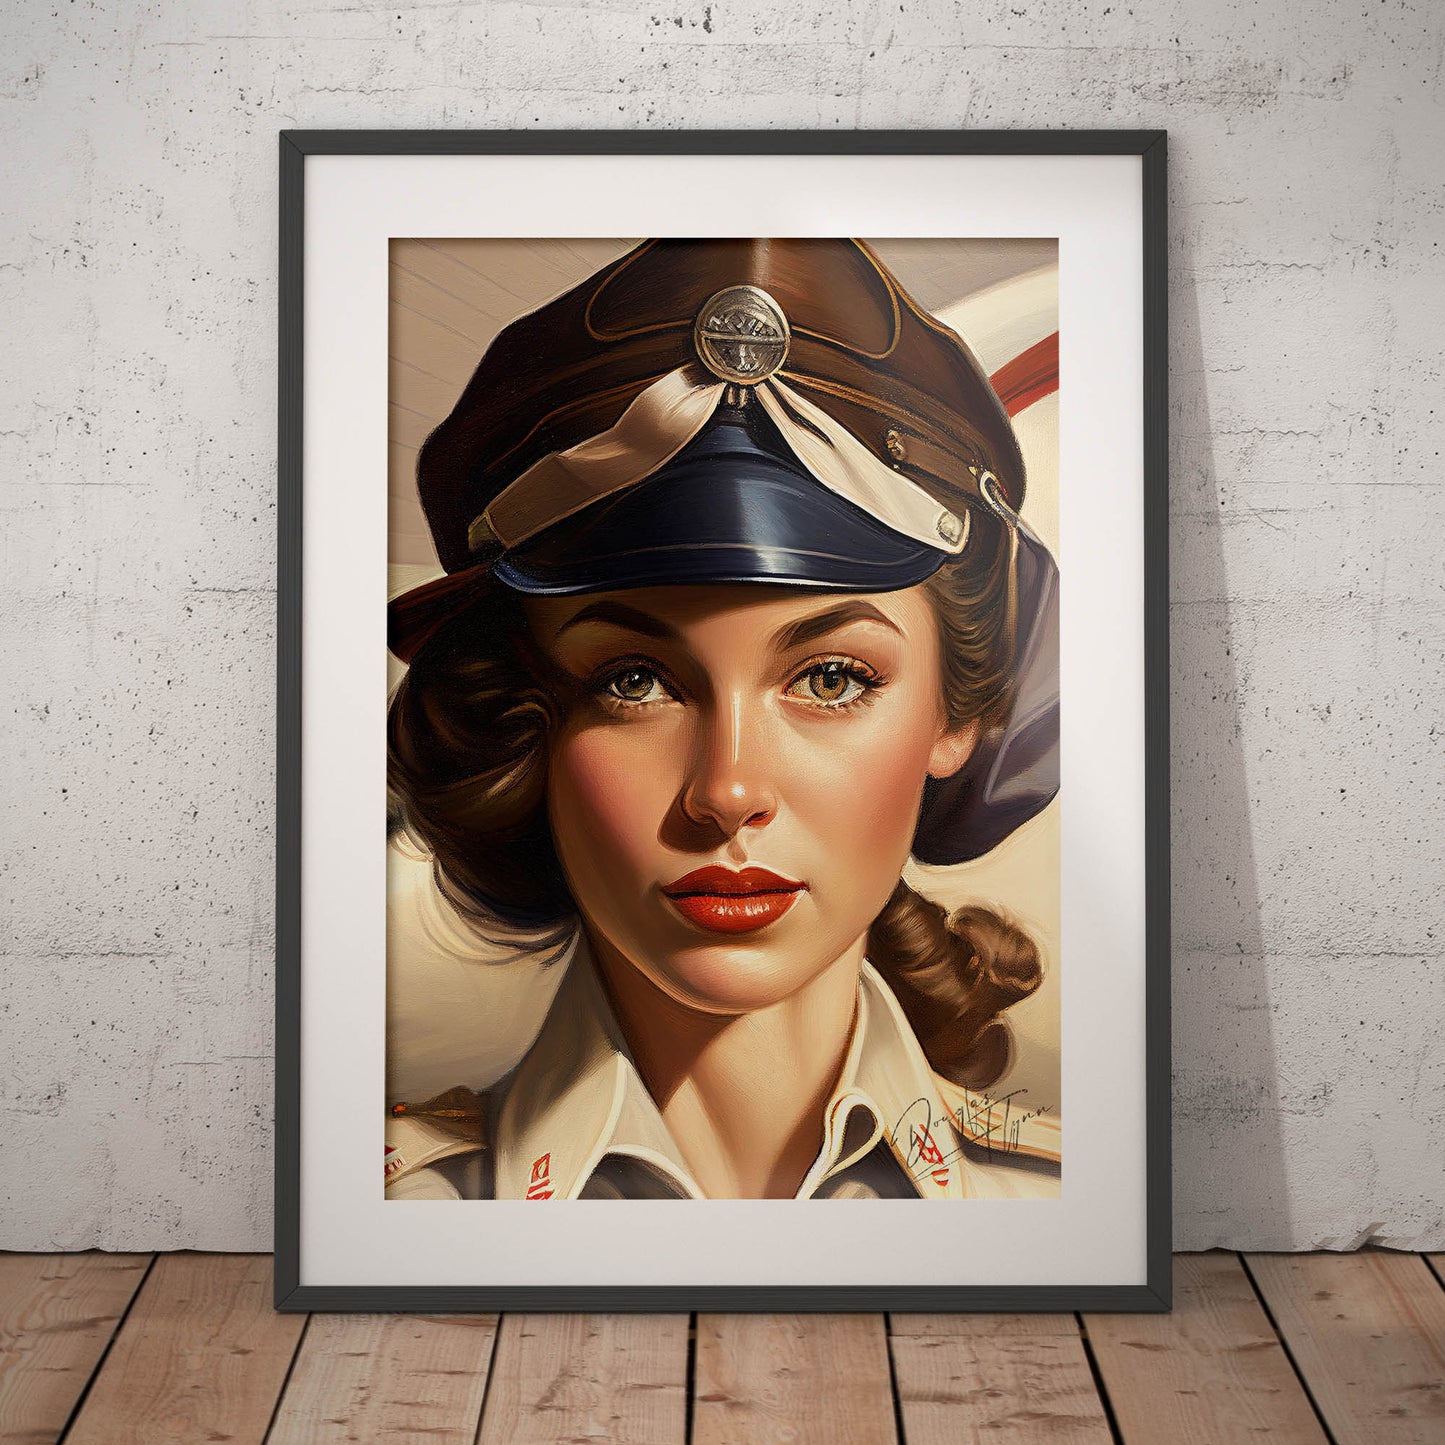 »Let me be your wingman« retro poster